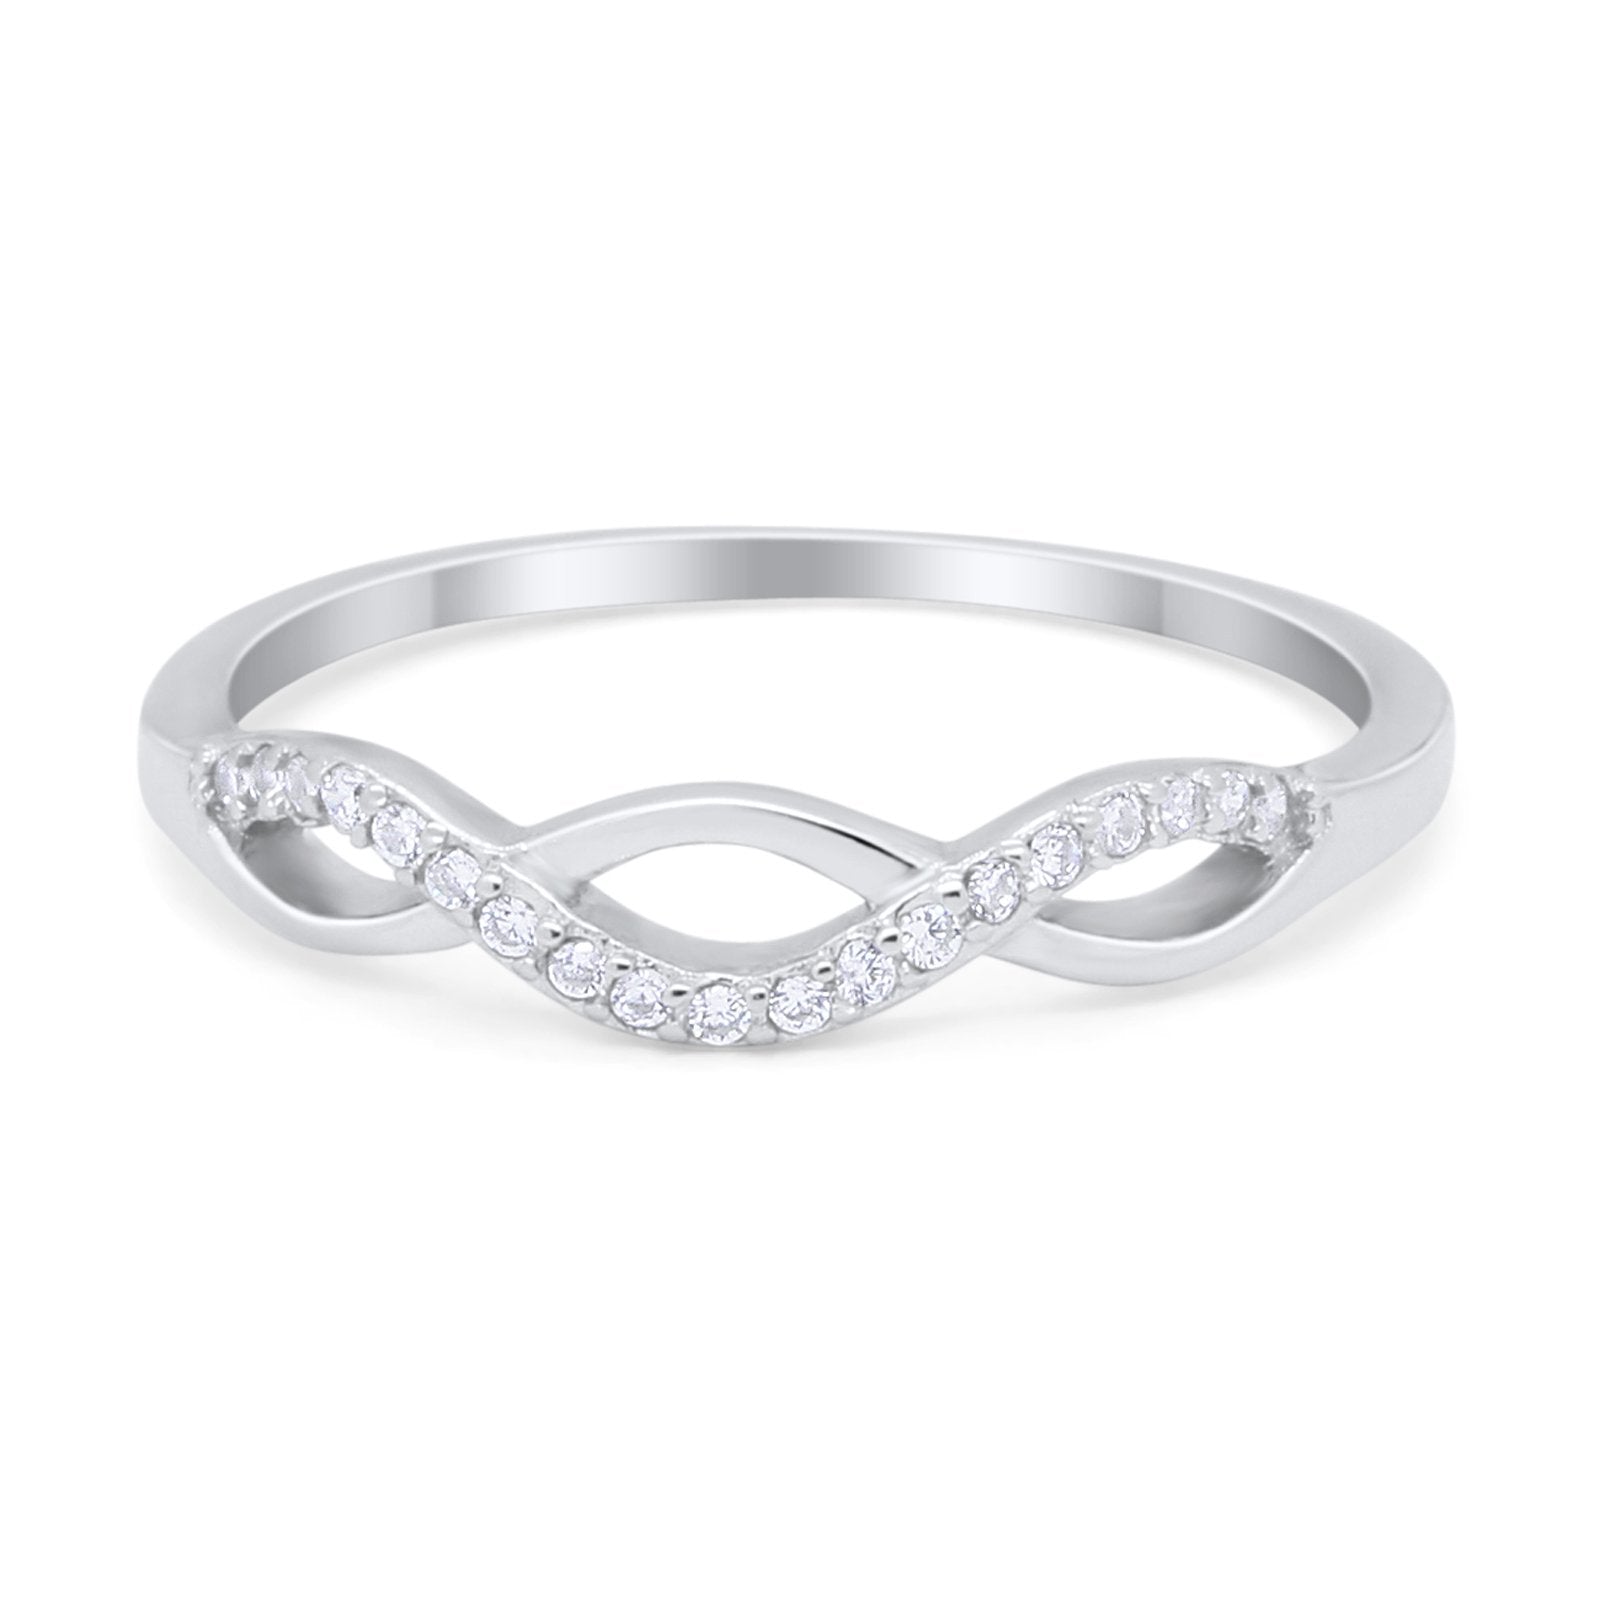 Twisted Infinity Band Ring Round Simulated Cubic Zirconia 925 Sterling Silver